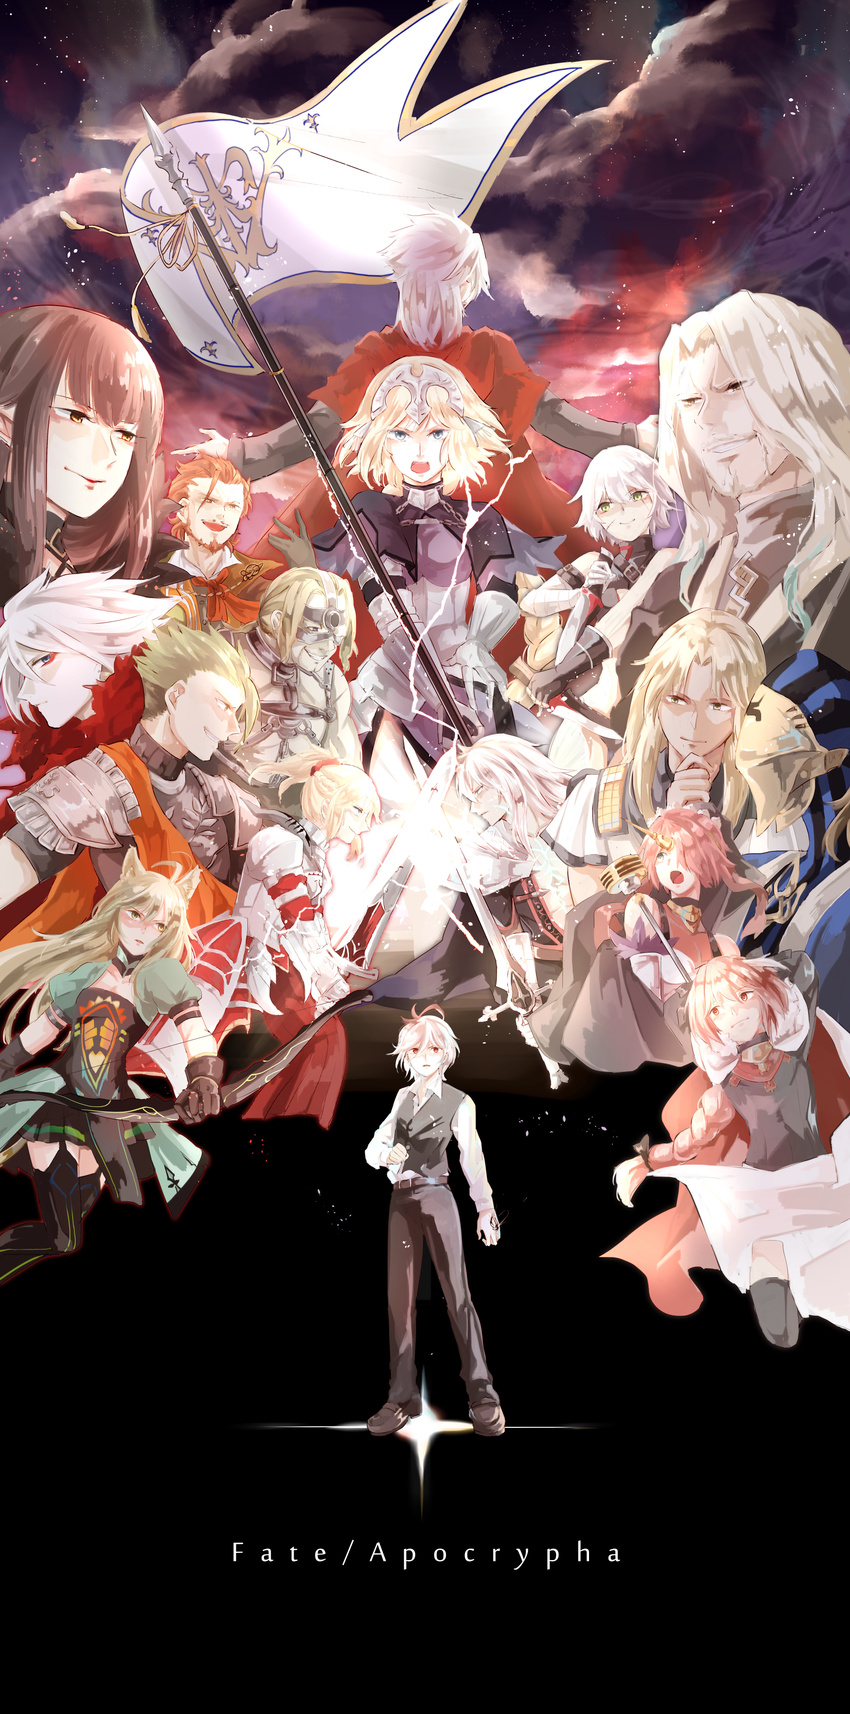 6+girls absurdres achilles_(fate) ahoge amakusa_shirou_(fate) animal_ears astolfo_(fate) atalanta_(fate) avicebron_(fate) balmung_(fate/apocrypha) beard belt black_hair blonde_hair blue_eyes blush braid cat_ears chiron_(fate) clarent command_spell commentary_request dark_skin facial_hair fate/apocrypha fate_(series) frankenstein's_monster_(fate) fur_trim hair_ornament headpiece highres jack_the_ripper_(fate/apocrypha) jeanne_d'arc_(fate) jeanne_d'arc_(fate)_(all) karna_(fate) long_hair long_image looking_at_viewer mordred_(fate) mordred_(fate)_(all) multiple_boys multiple_girls open_mouth otoko_no_ko pink_hair pointy_ears ponytail scar semiramis_(fate) short_hair sieg_(fate/apocrypha) siegfried_(fate) single_braid smile sooru0720 spartacus_(fate) sword very_long_hair vlad_iii_(fate/apocrypha) weapon white_hair wide_image william_shakespeare_(fate)